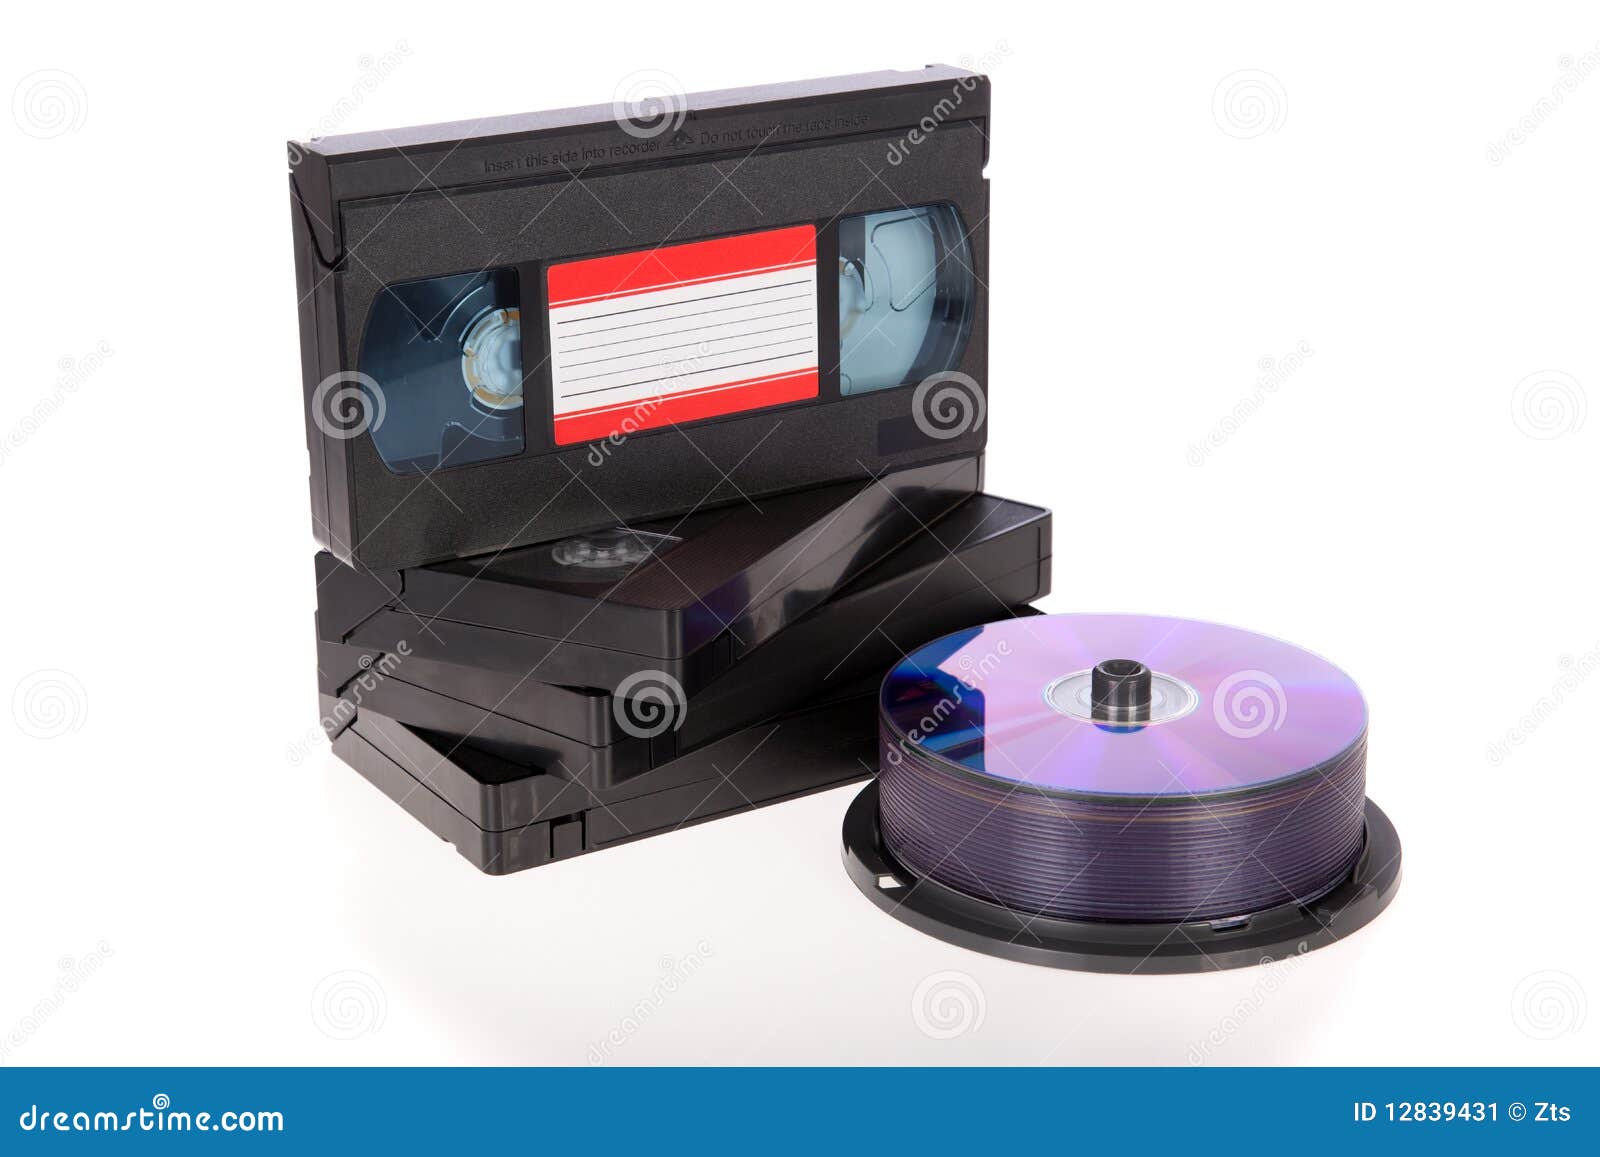 Old Video Cassette Tapes With DVD Discs Stock Image 